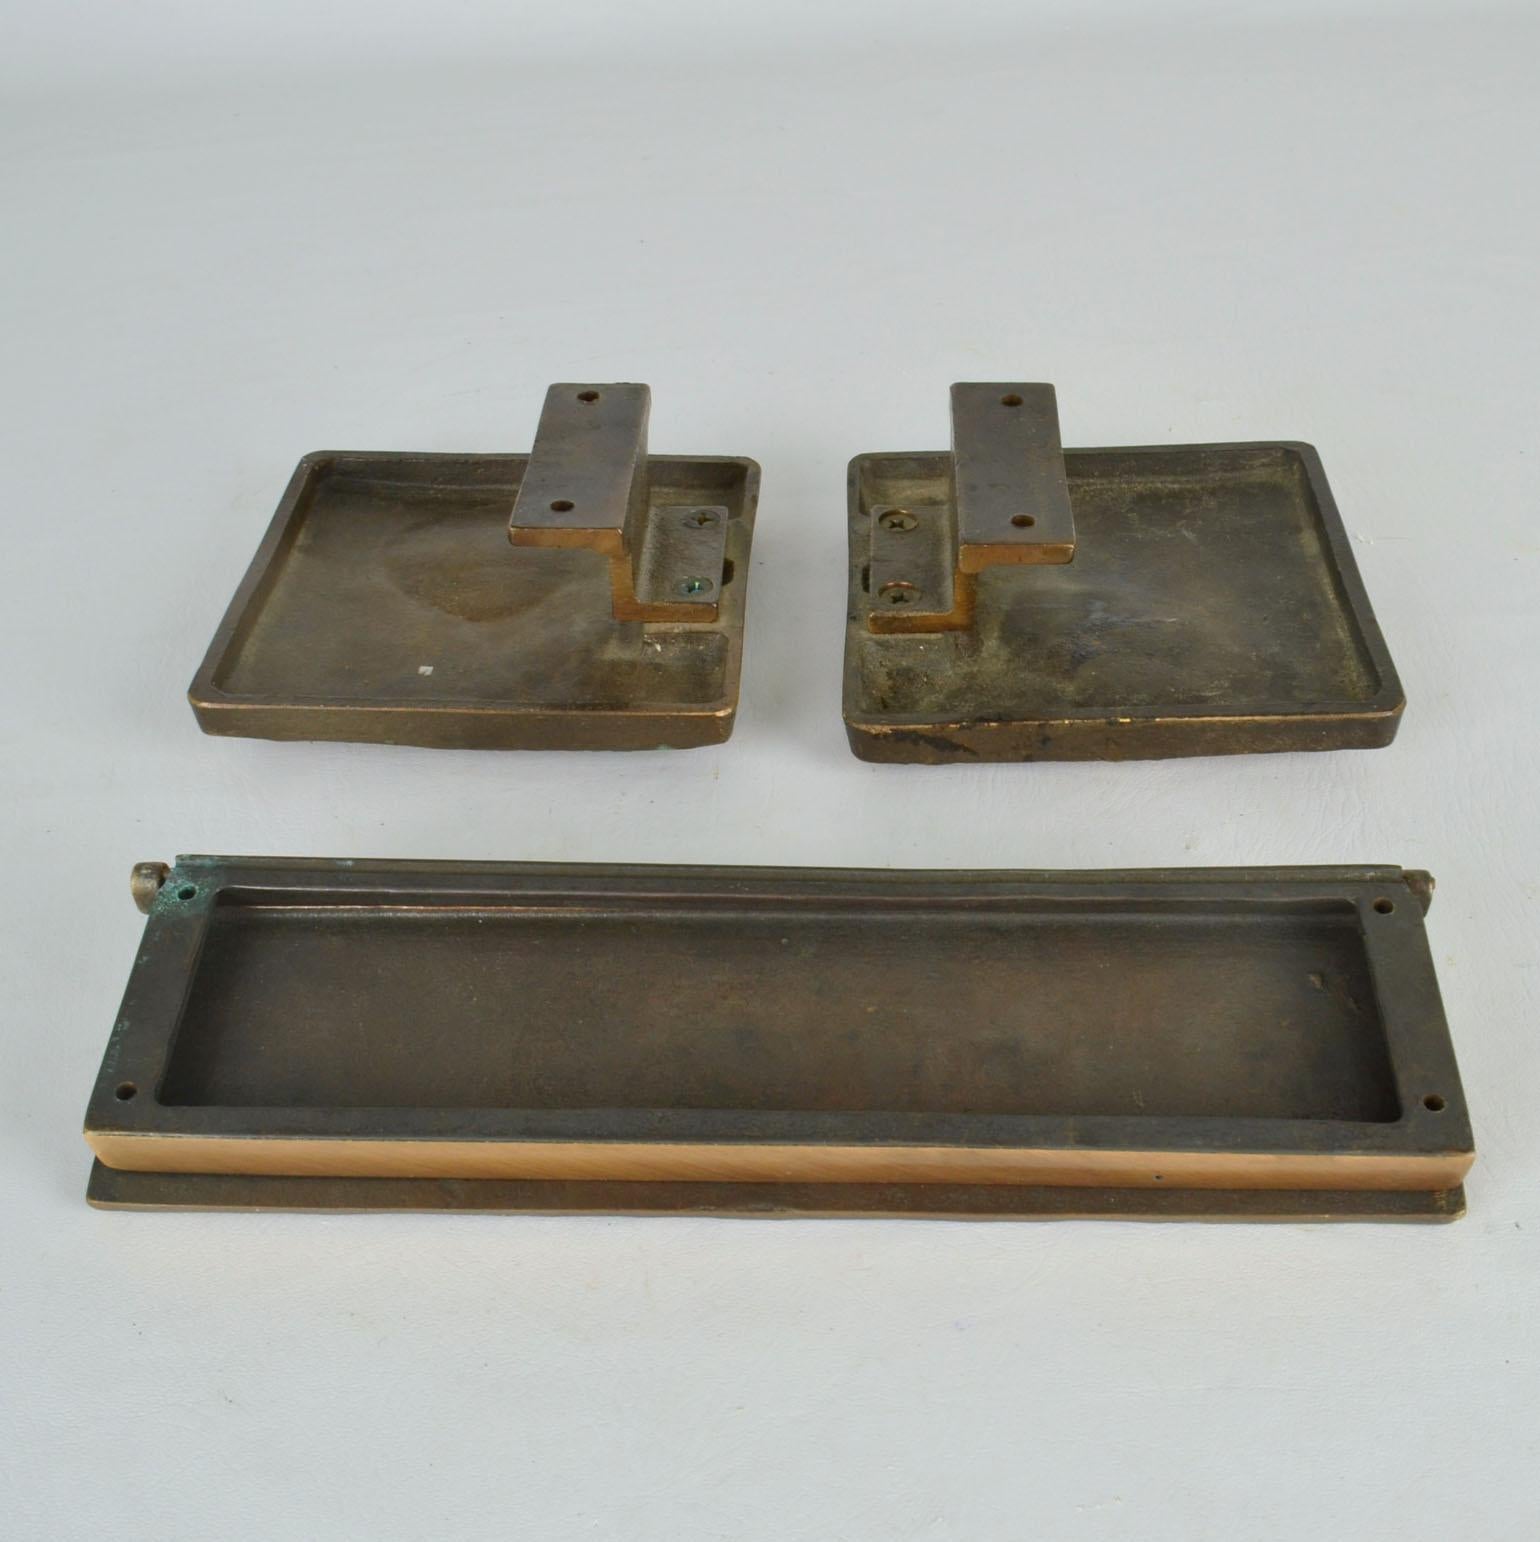 Architectural Push Pull Door Handles and Letterbox with Crater Relief In Excellent Condition For Sale In London, GB